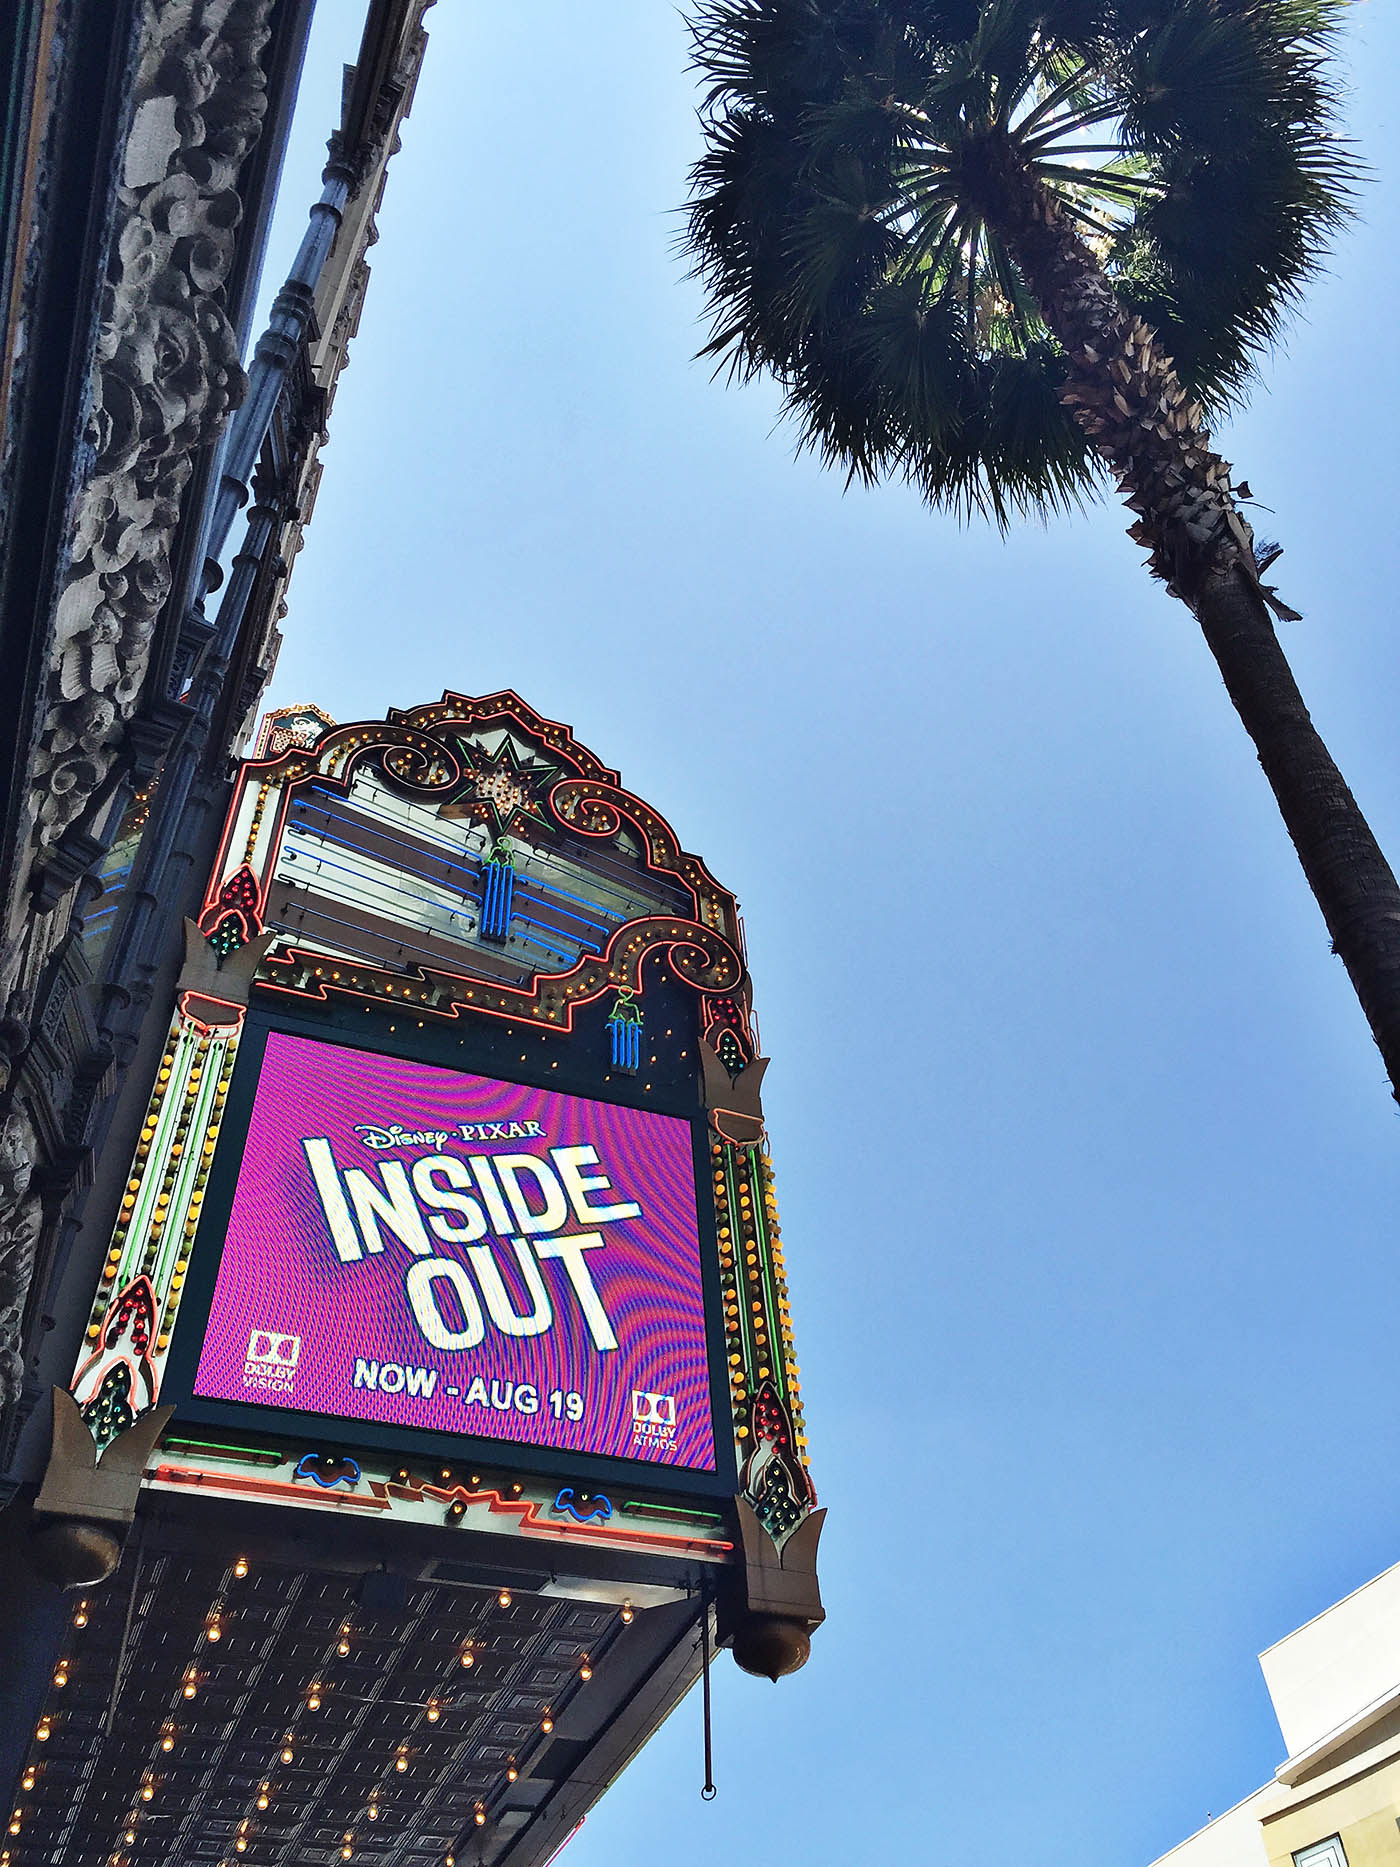 Inside Out and "Music of Light" now playing at El Capitan Theatre, Hollywood